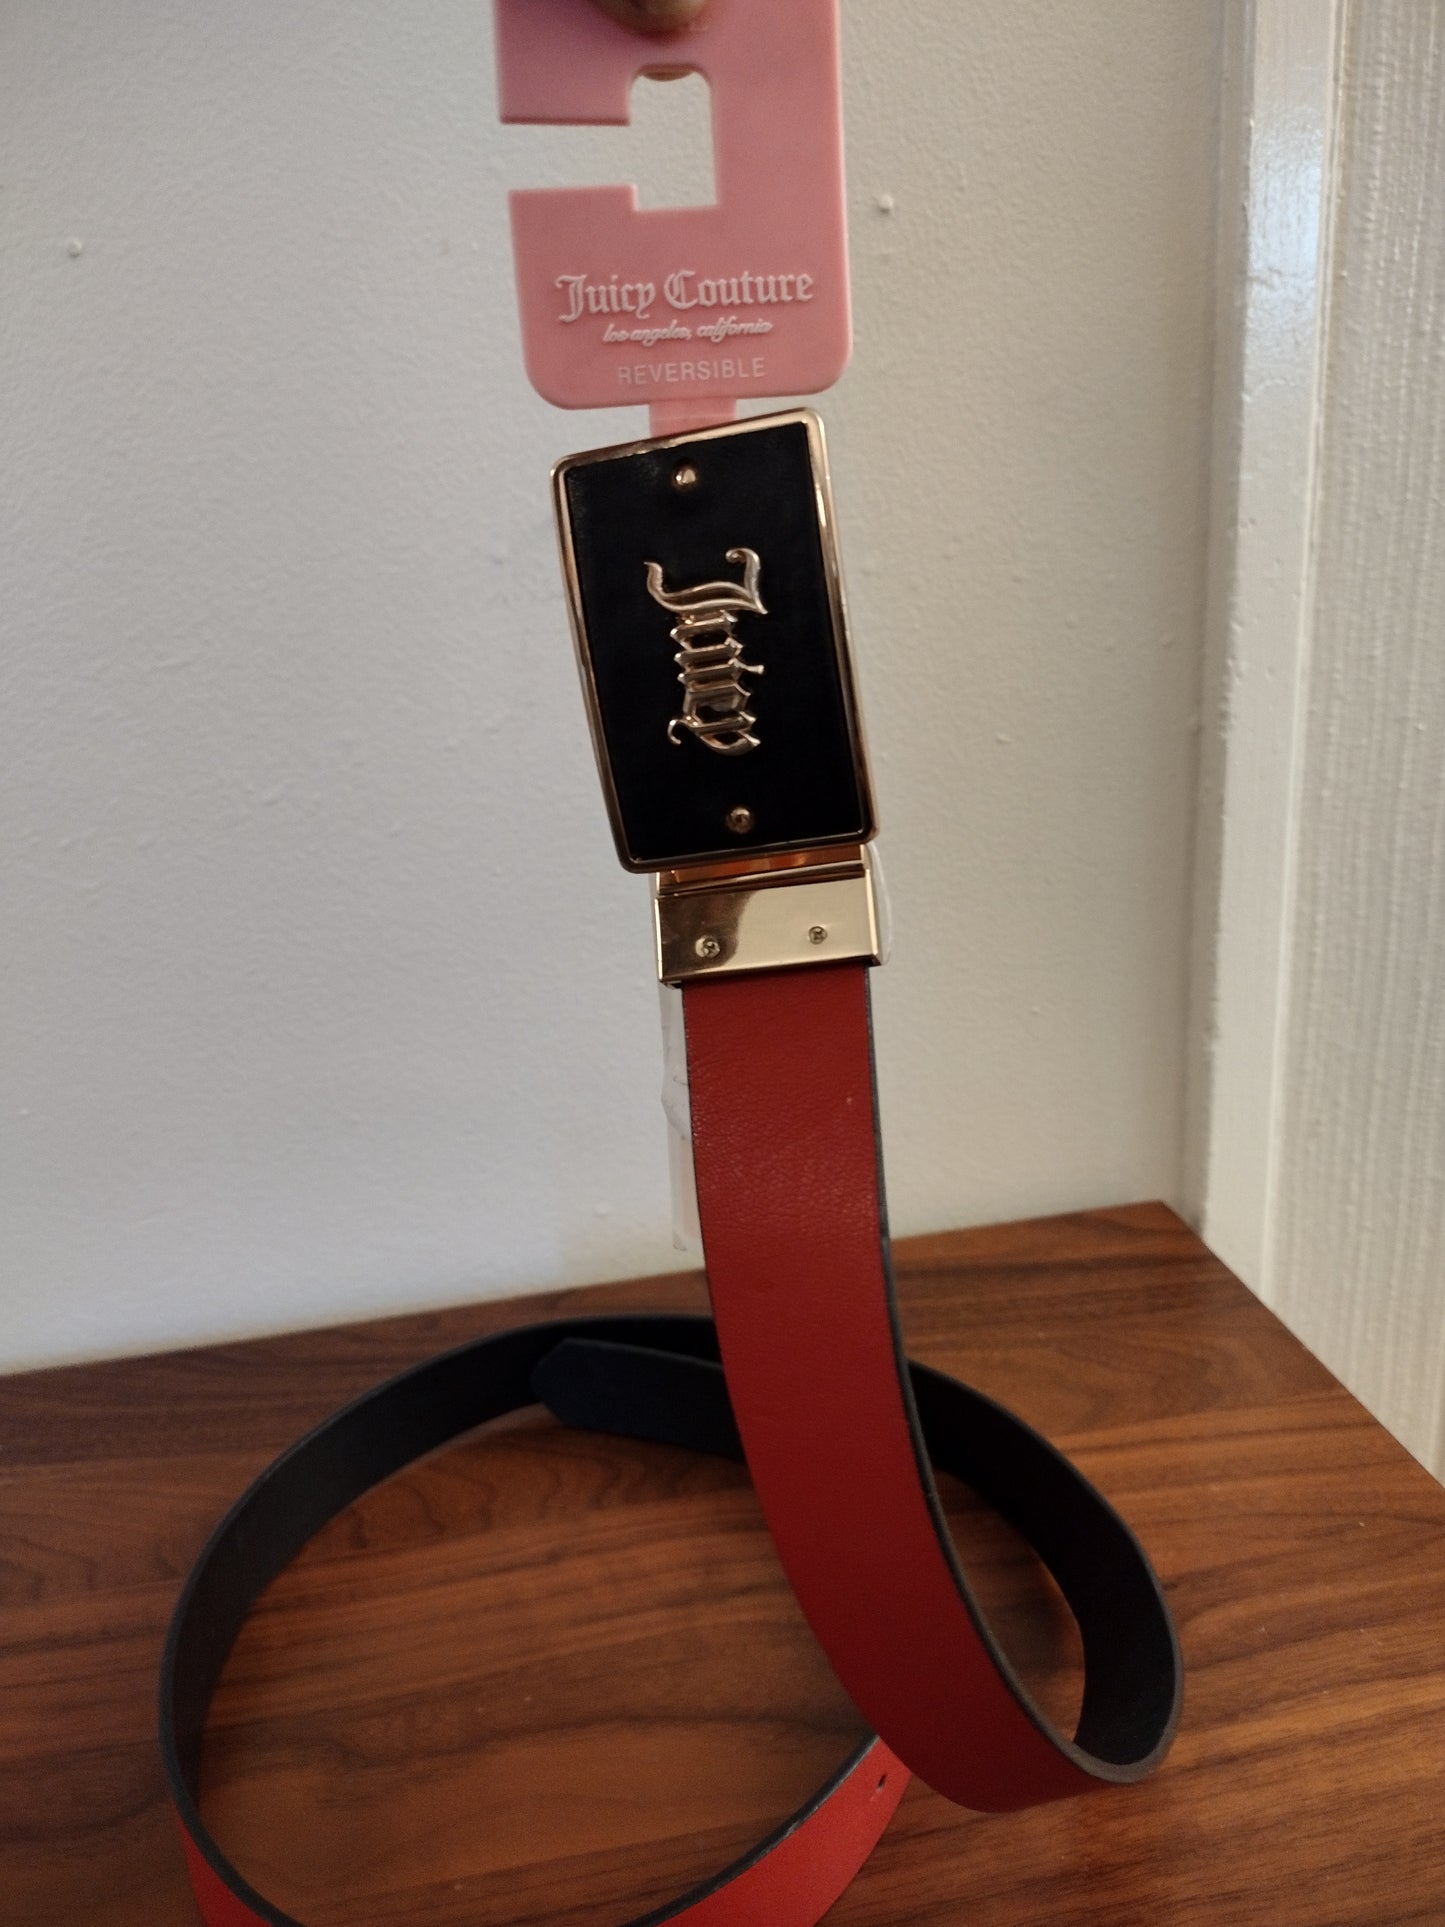 Juicy Couture Reversible Women's Red , Gold & Black Belt